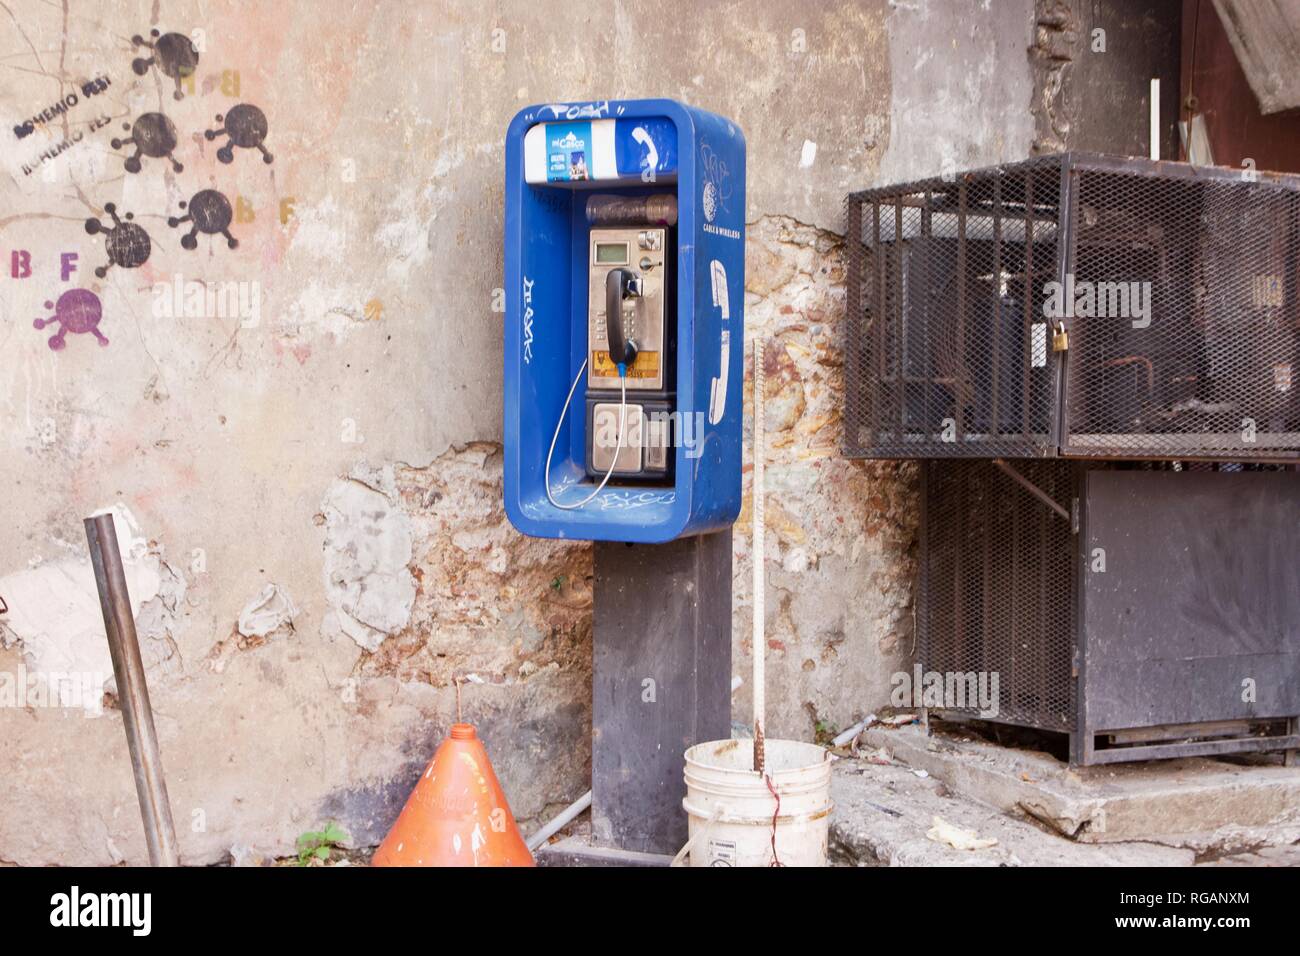 A blue public payphone or public telephone surrounded by graffiti in an urban setting Stock Photo